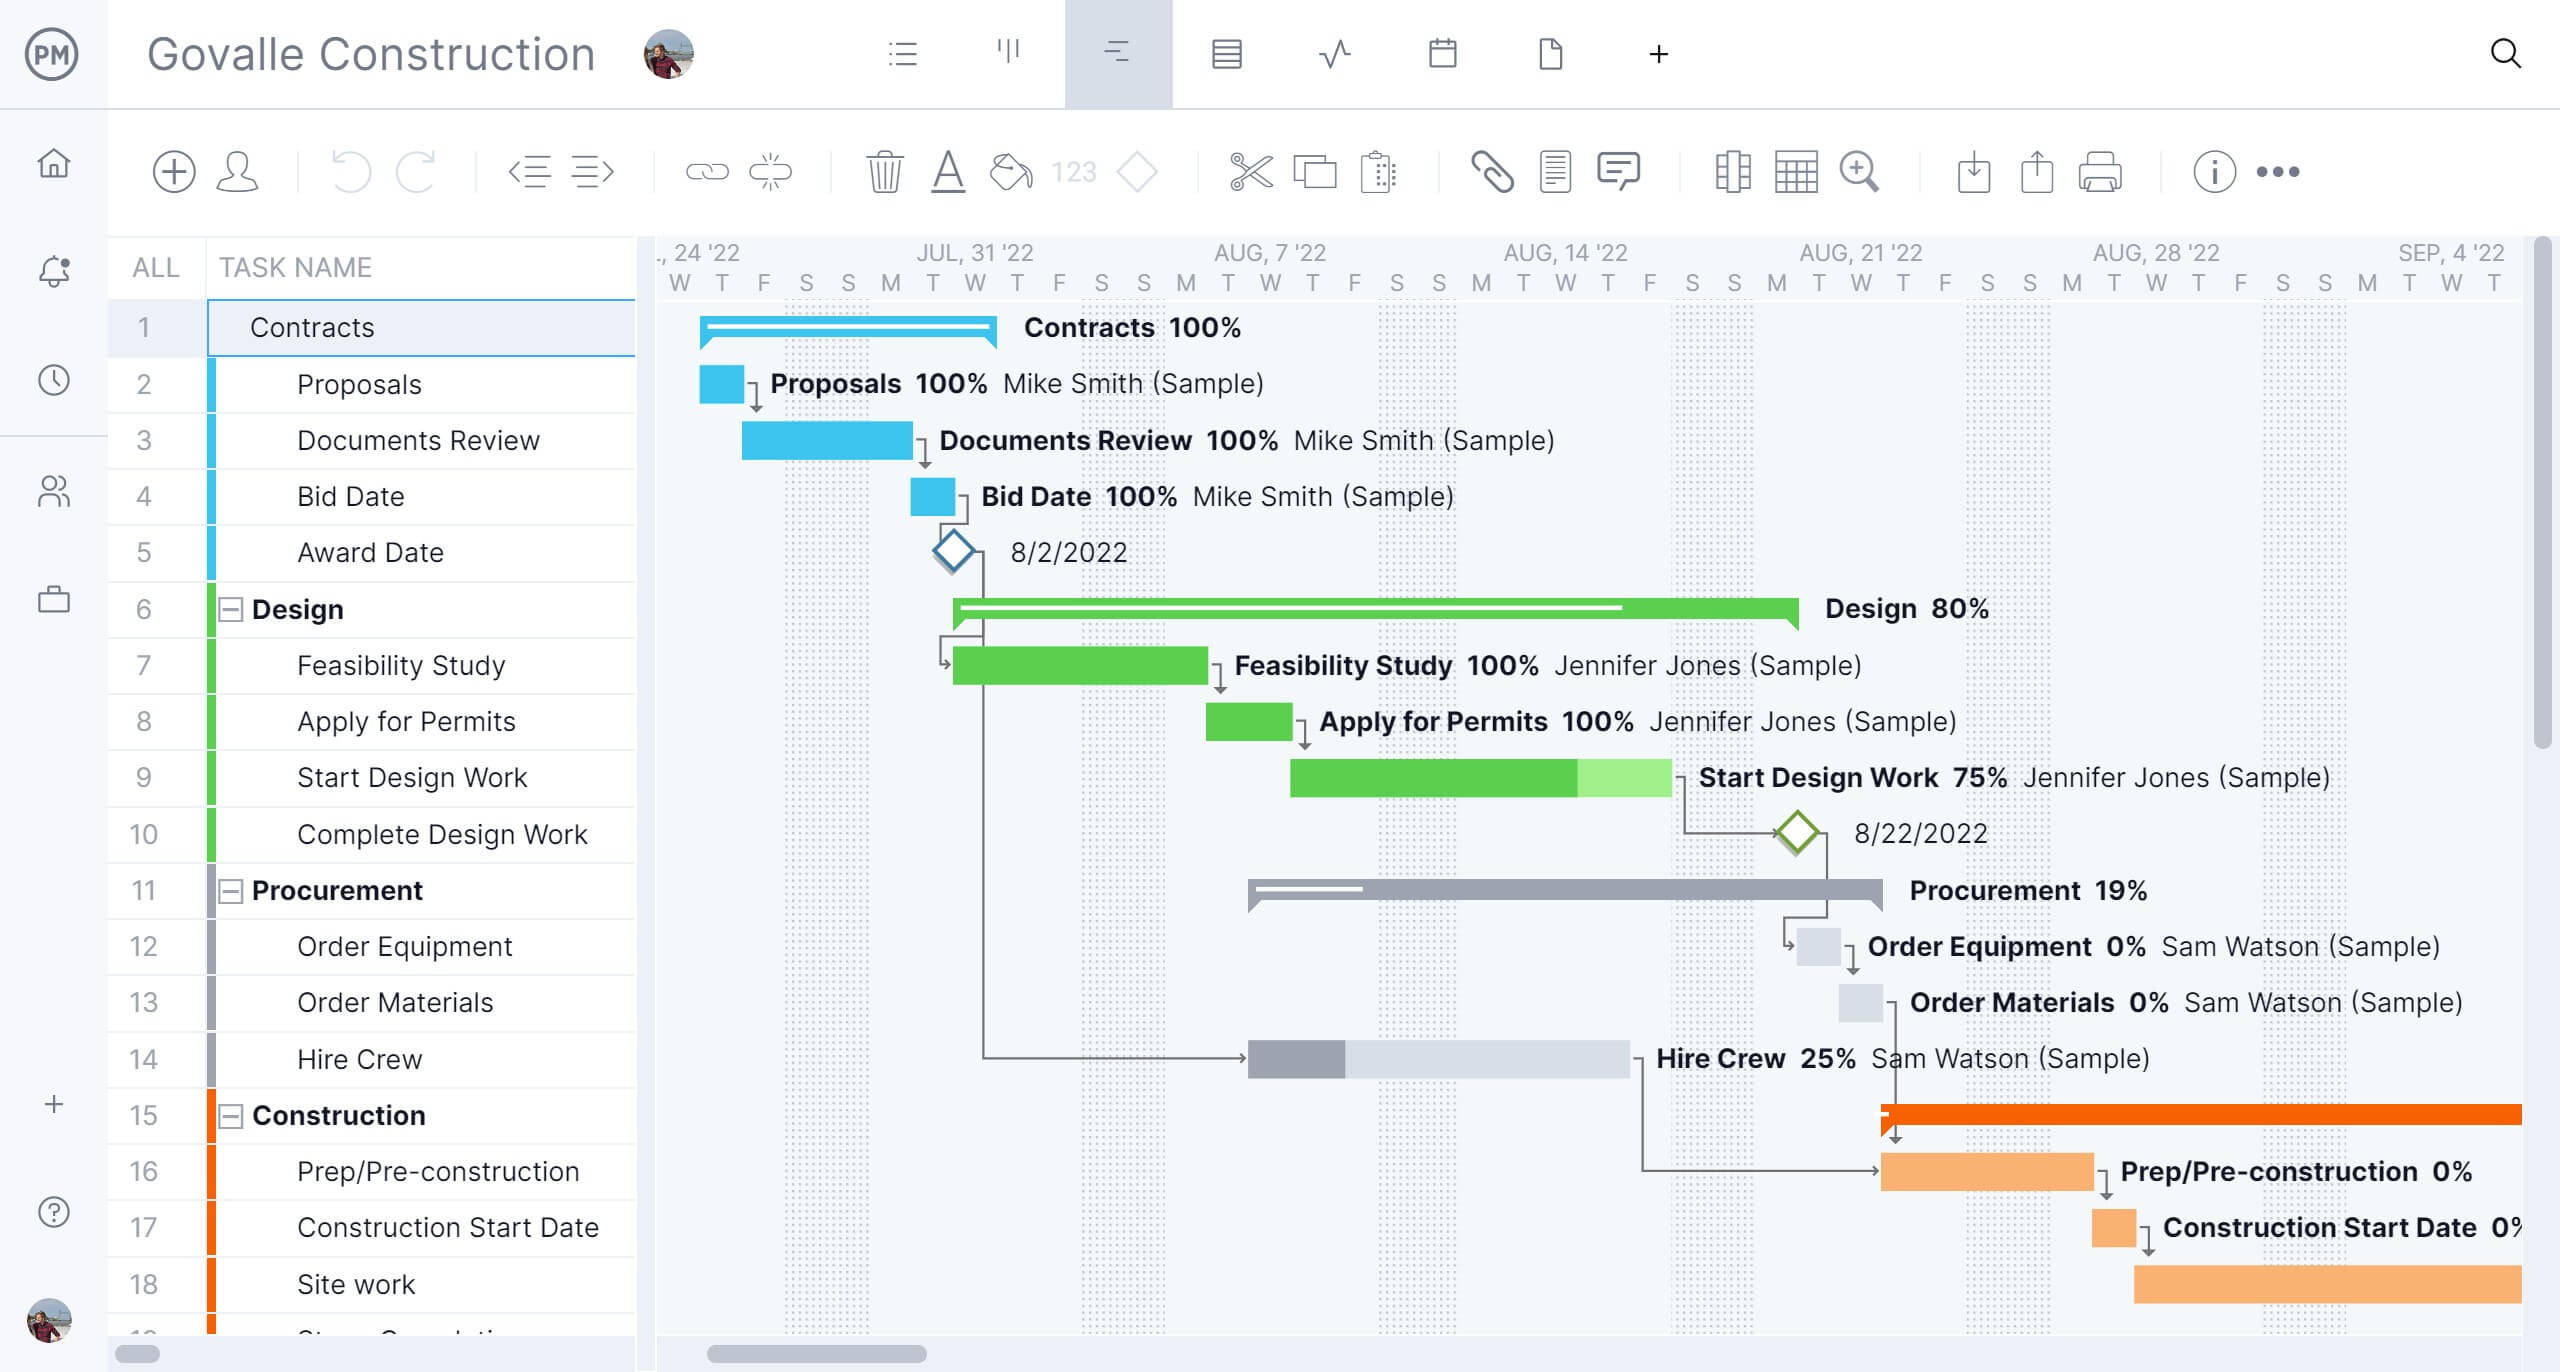 ProjectManager's Gantt chart is the perfect tool for construction planning